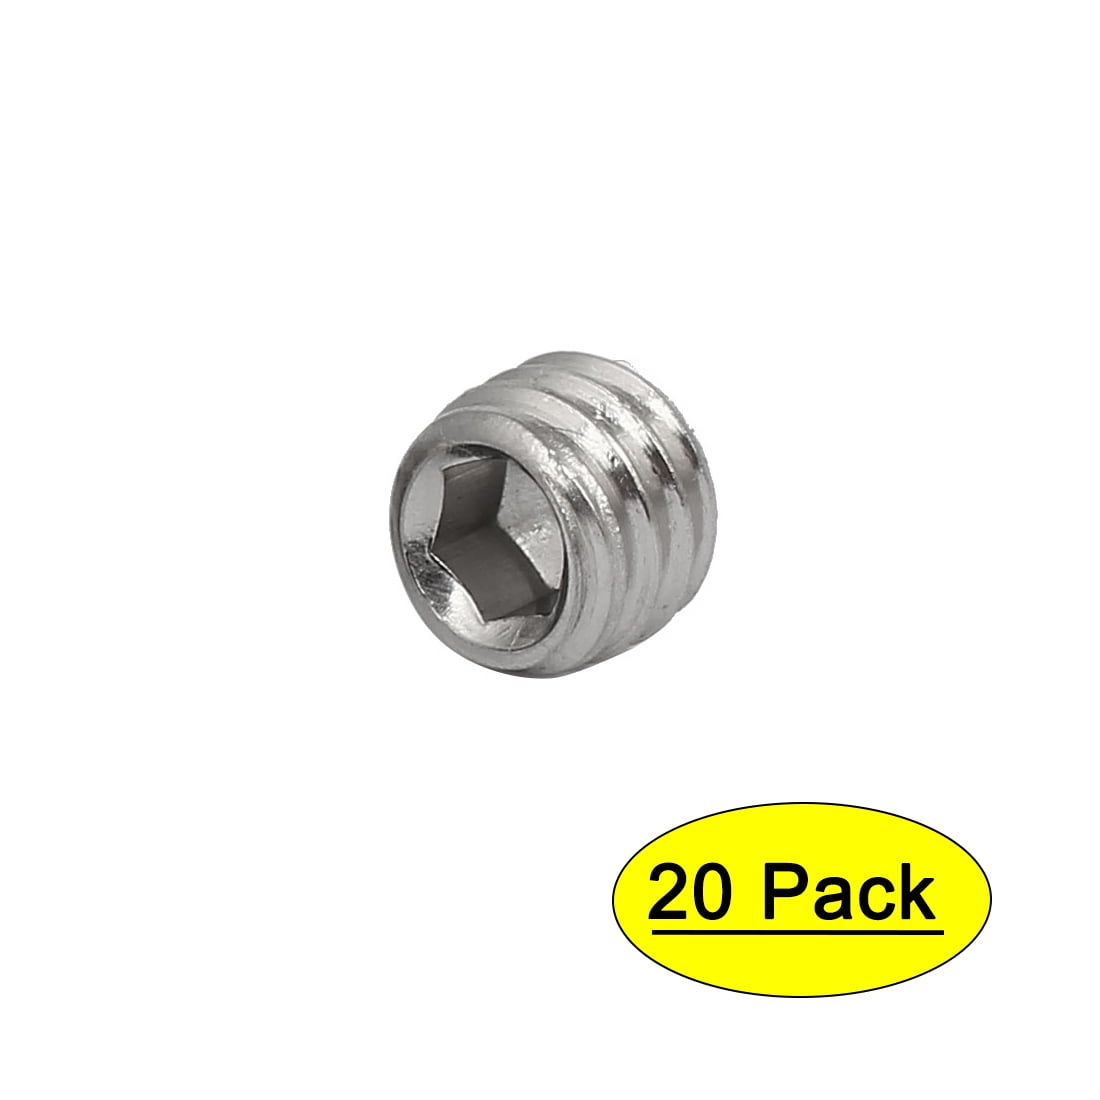 Mixed Pack of 25 Assorted M5 GRUB SCREWS A2 Stainless Steel 